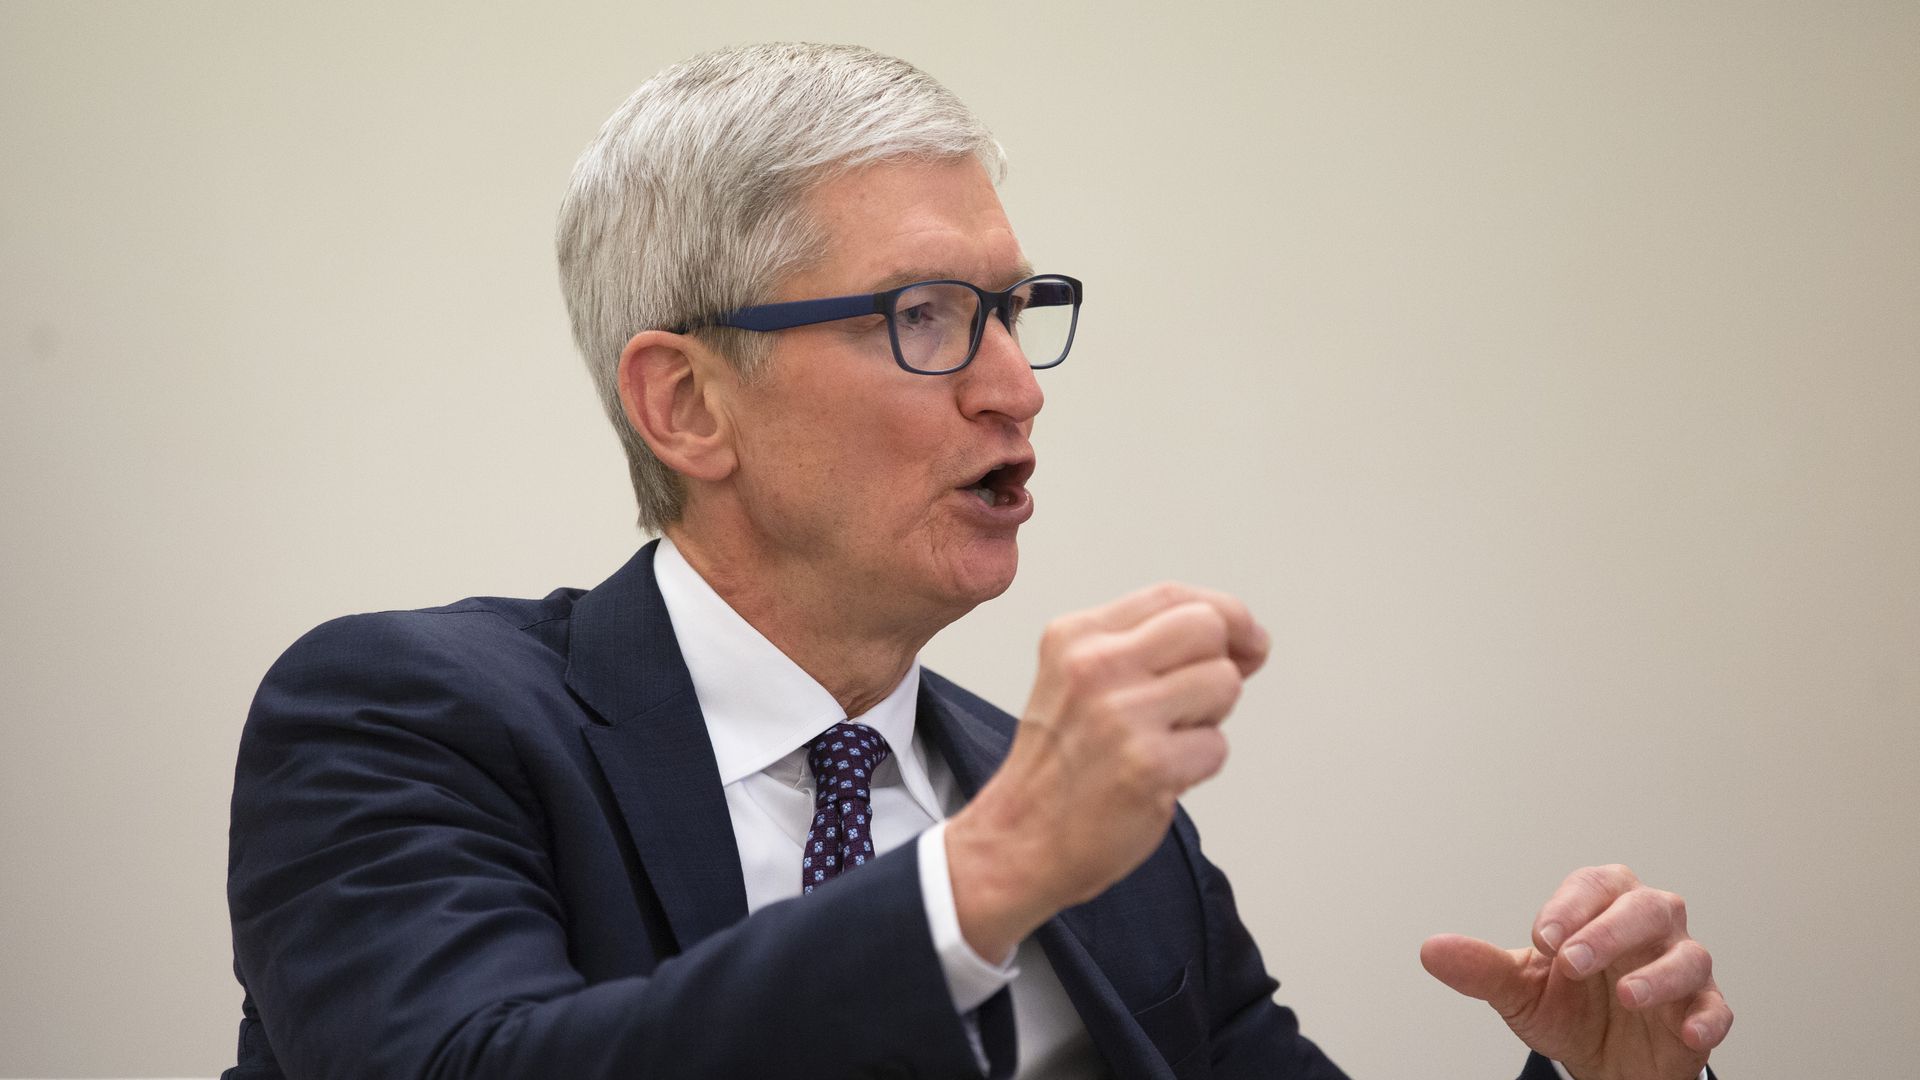 Tim Cook made $137 million in 2018